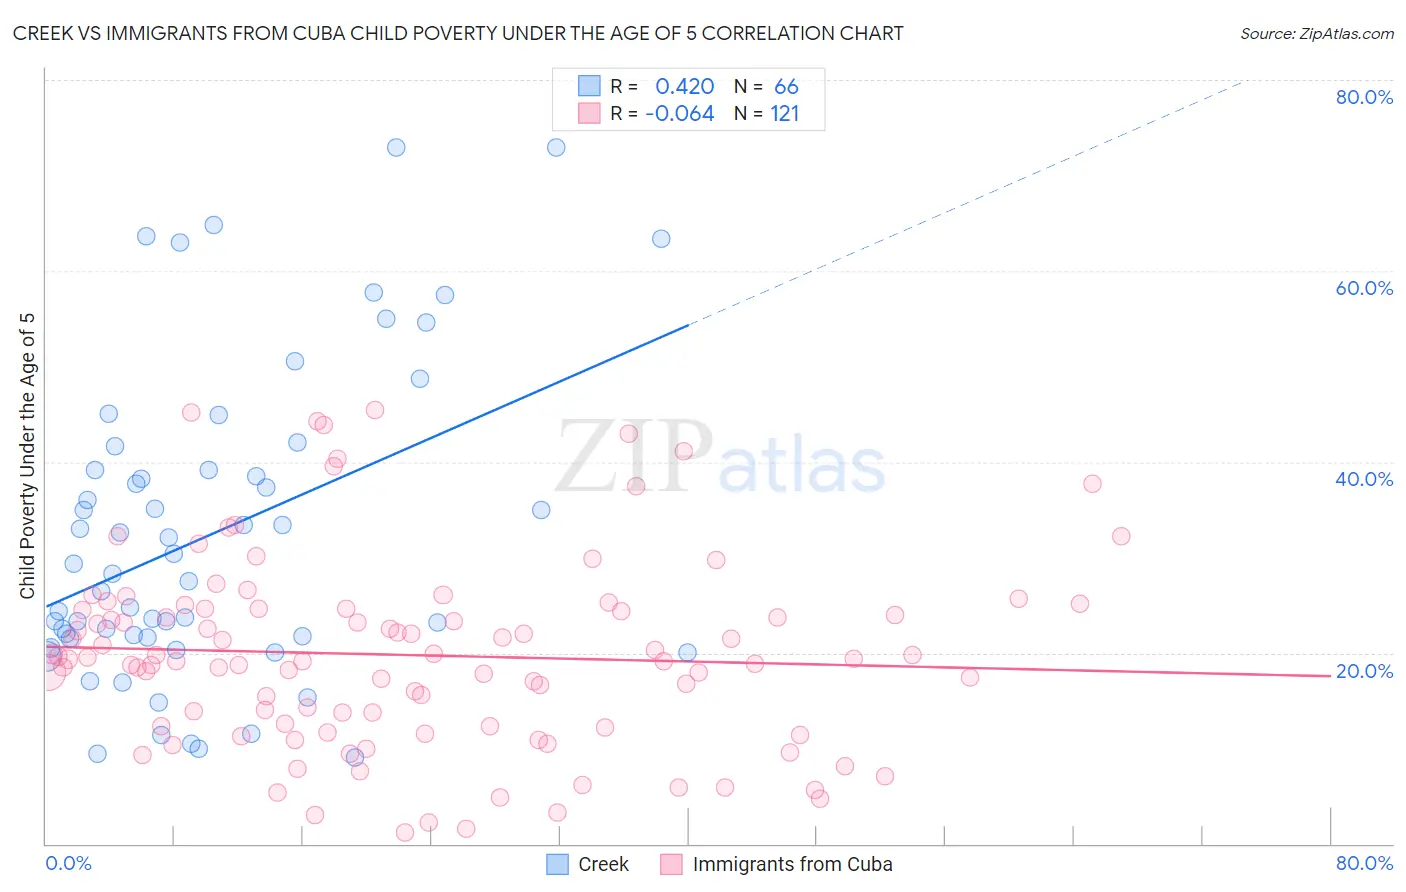 Creek vs Immigrants from Cuba Child Poverty Under the Age of 5